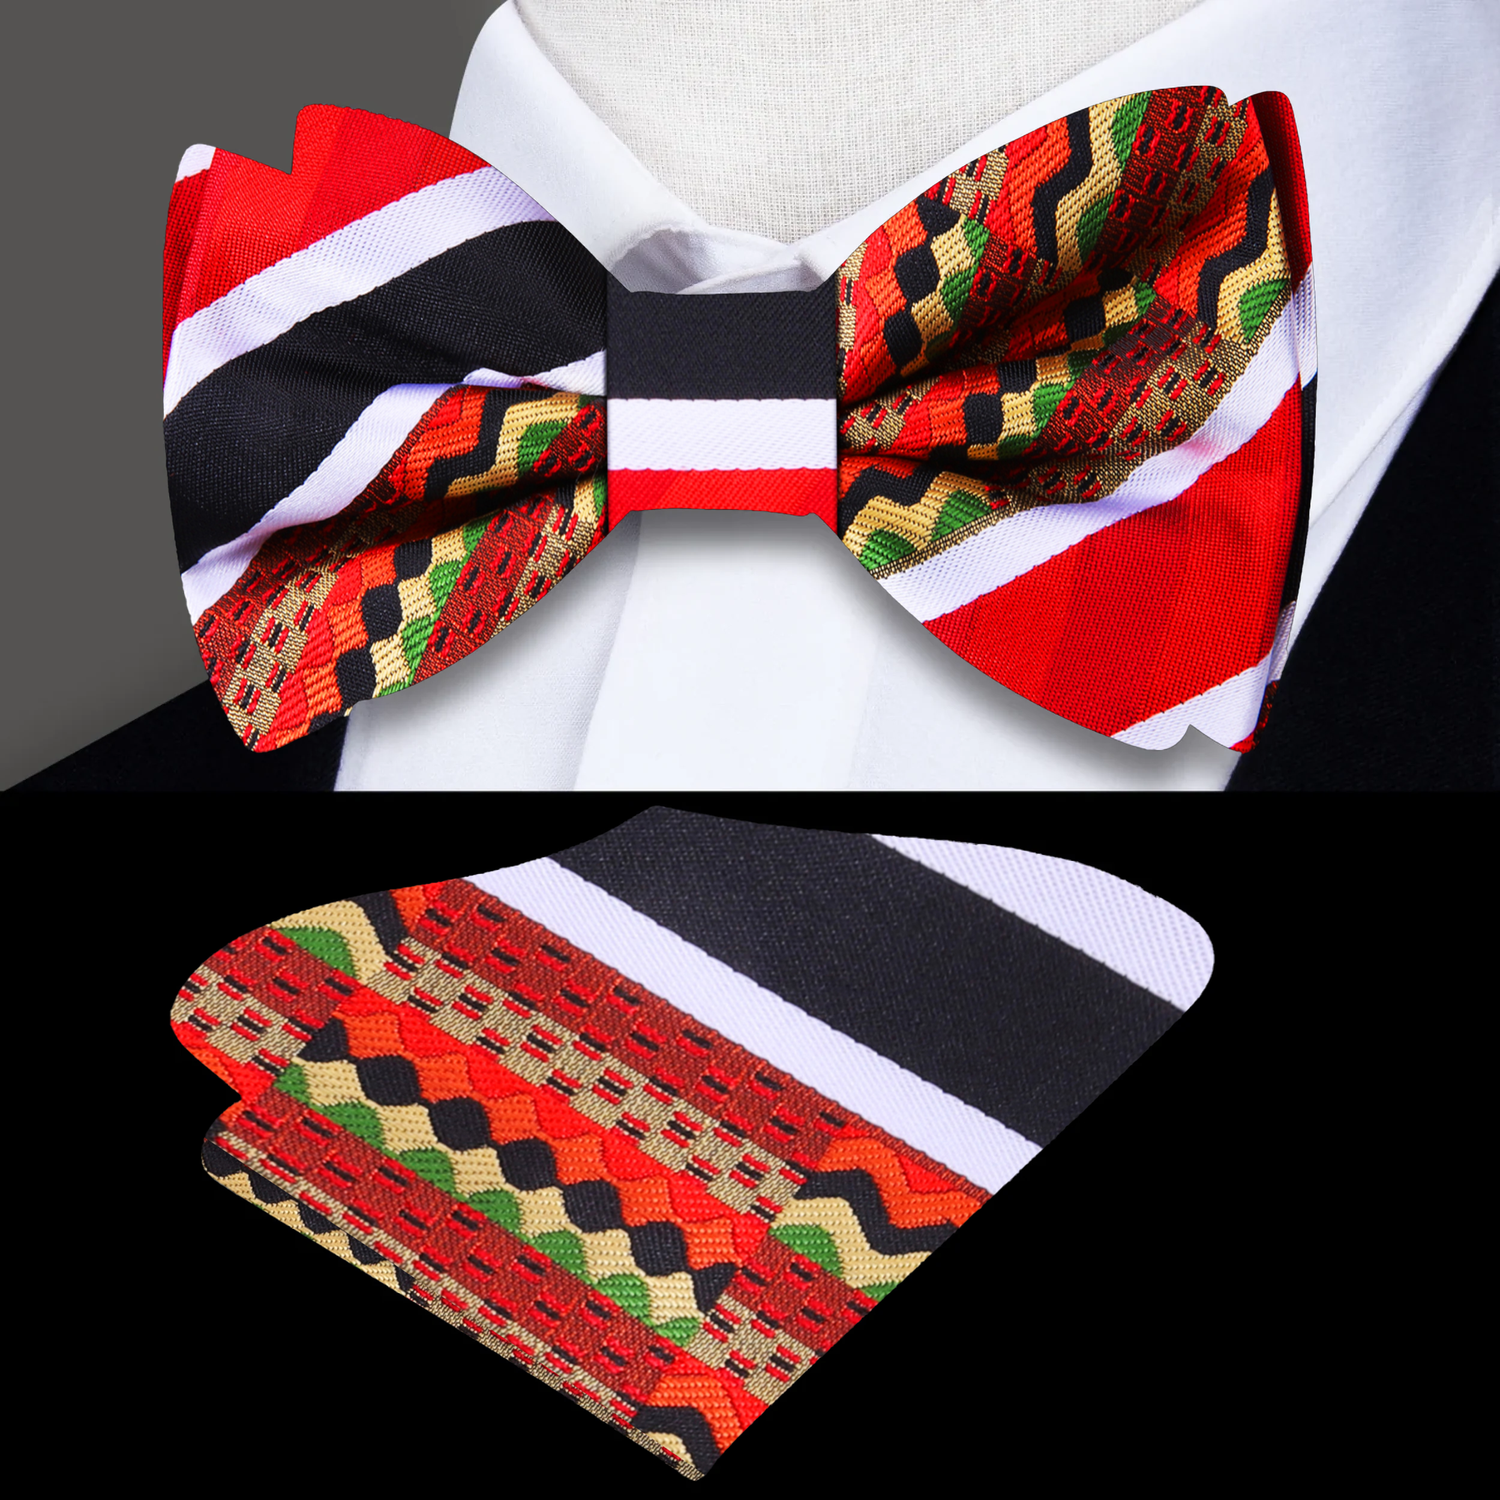 A Red, Black, White, Light Gold, Green, Brown Color Abstract Pattern Silk Bow Tie, Pocket Square